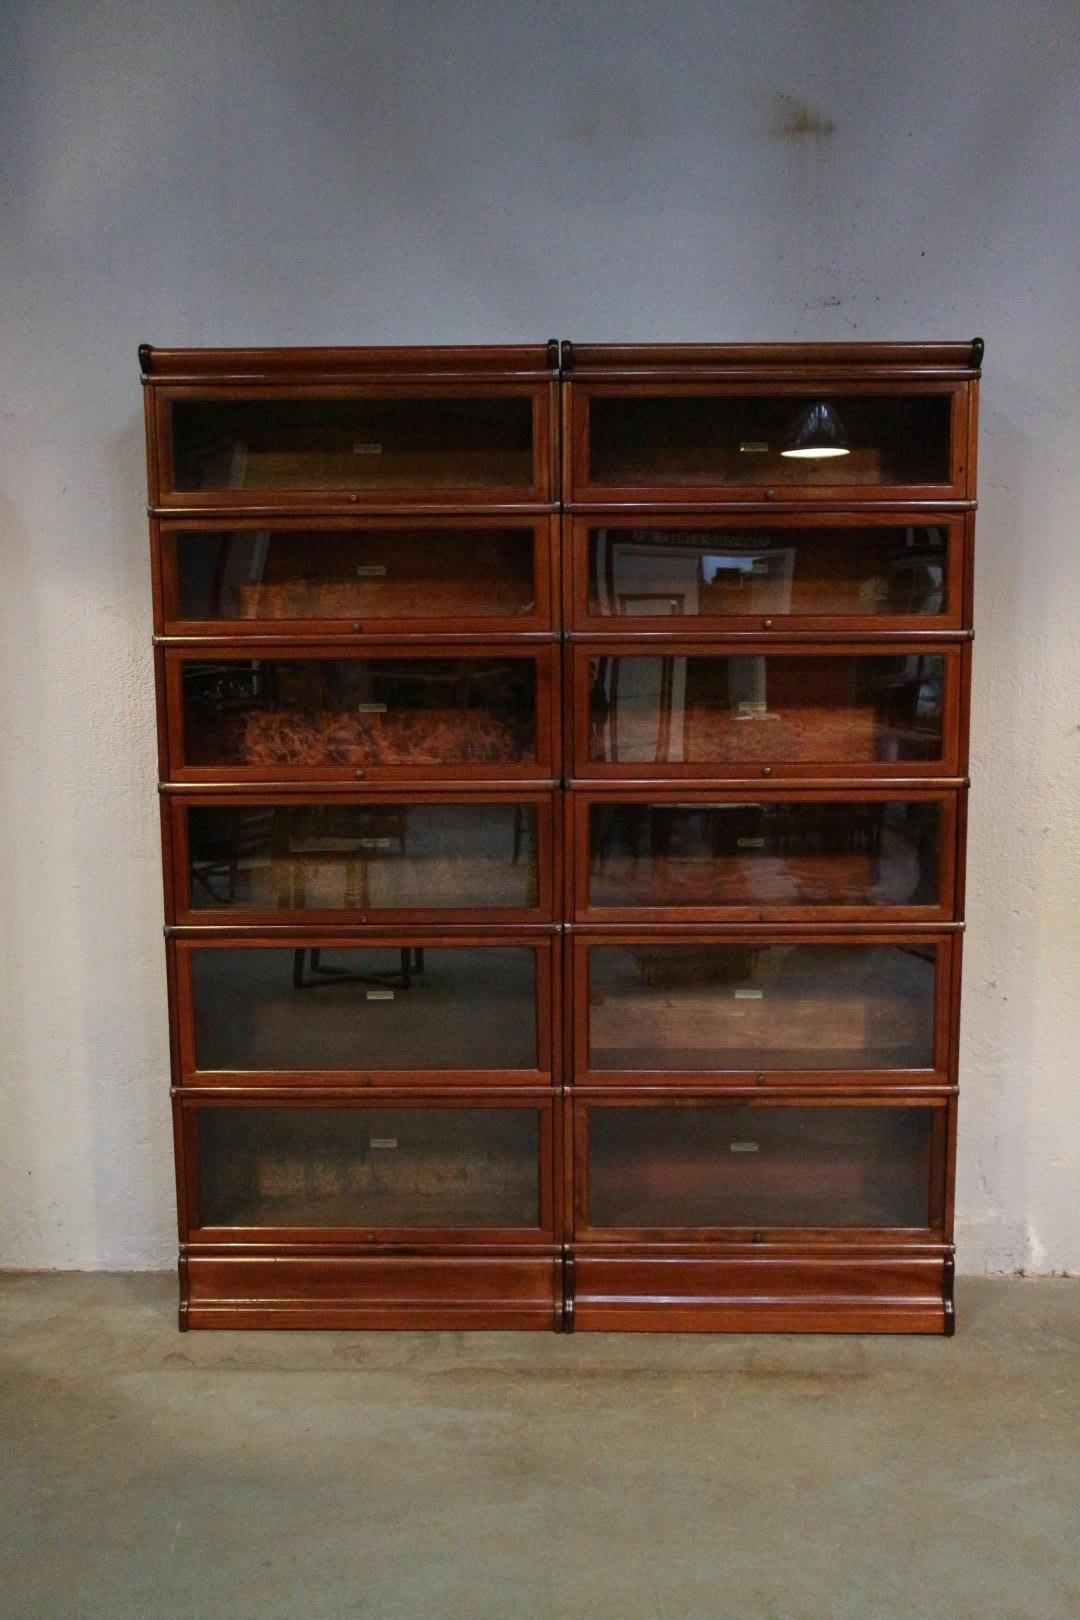 Beautiful antique mahogany Globe Wernicke bookcase in perfect condition.
The cabinet consists of 12 stackable parts in 3 different heights.

Origin: England
Period: Approx. 1895-1910
Size: 170cm x 29cm x h.215cm